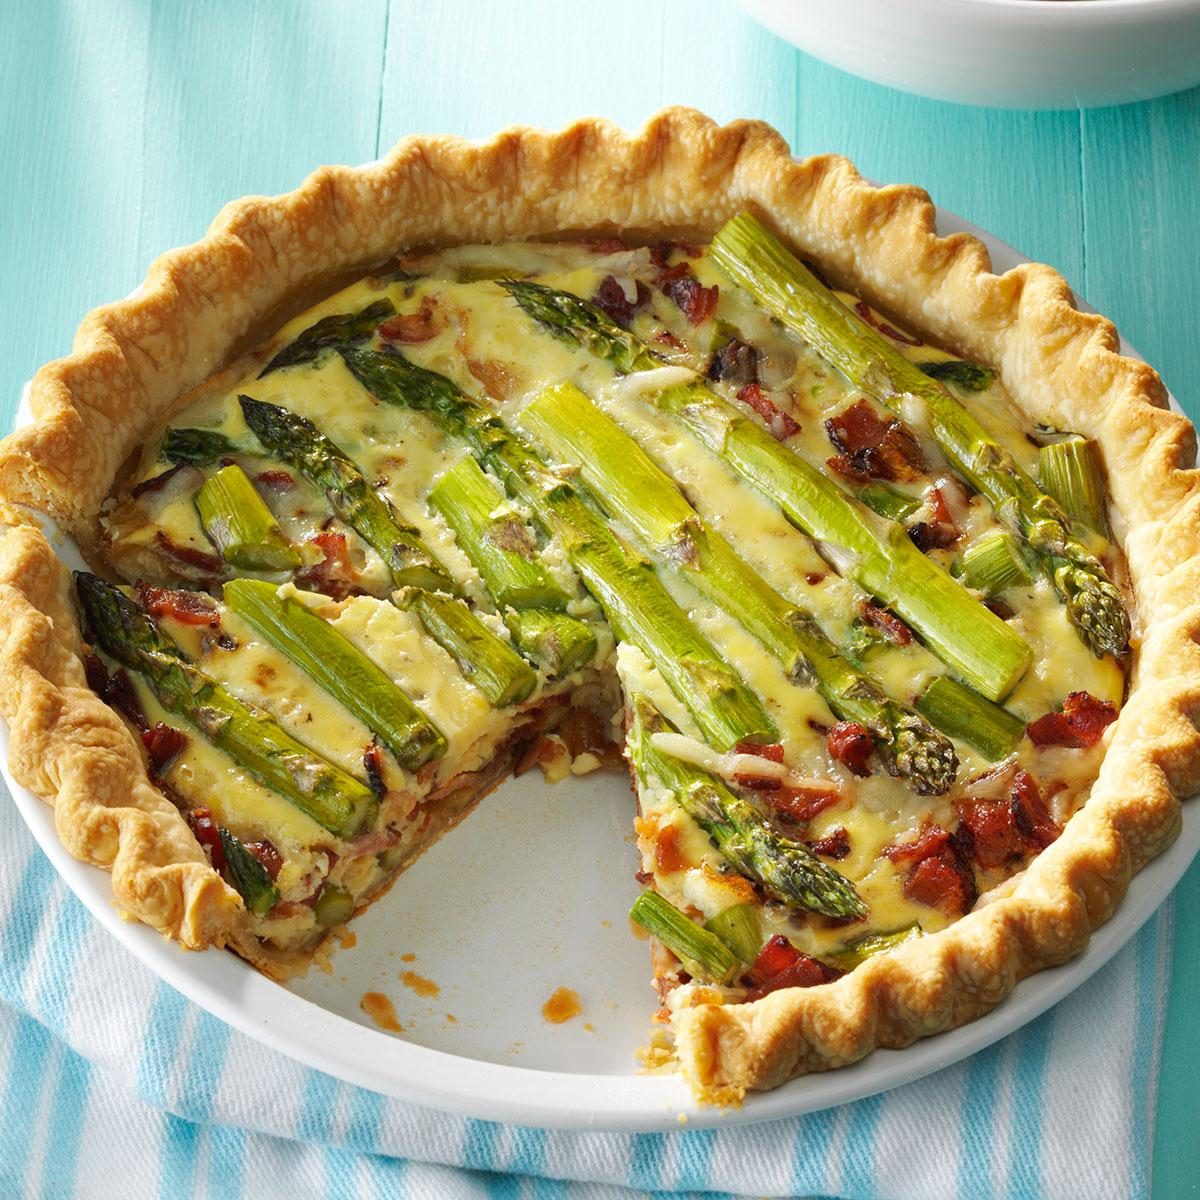 Asparagus Swiss Quiche Recipe: How to Make It